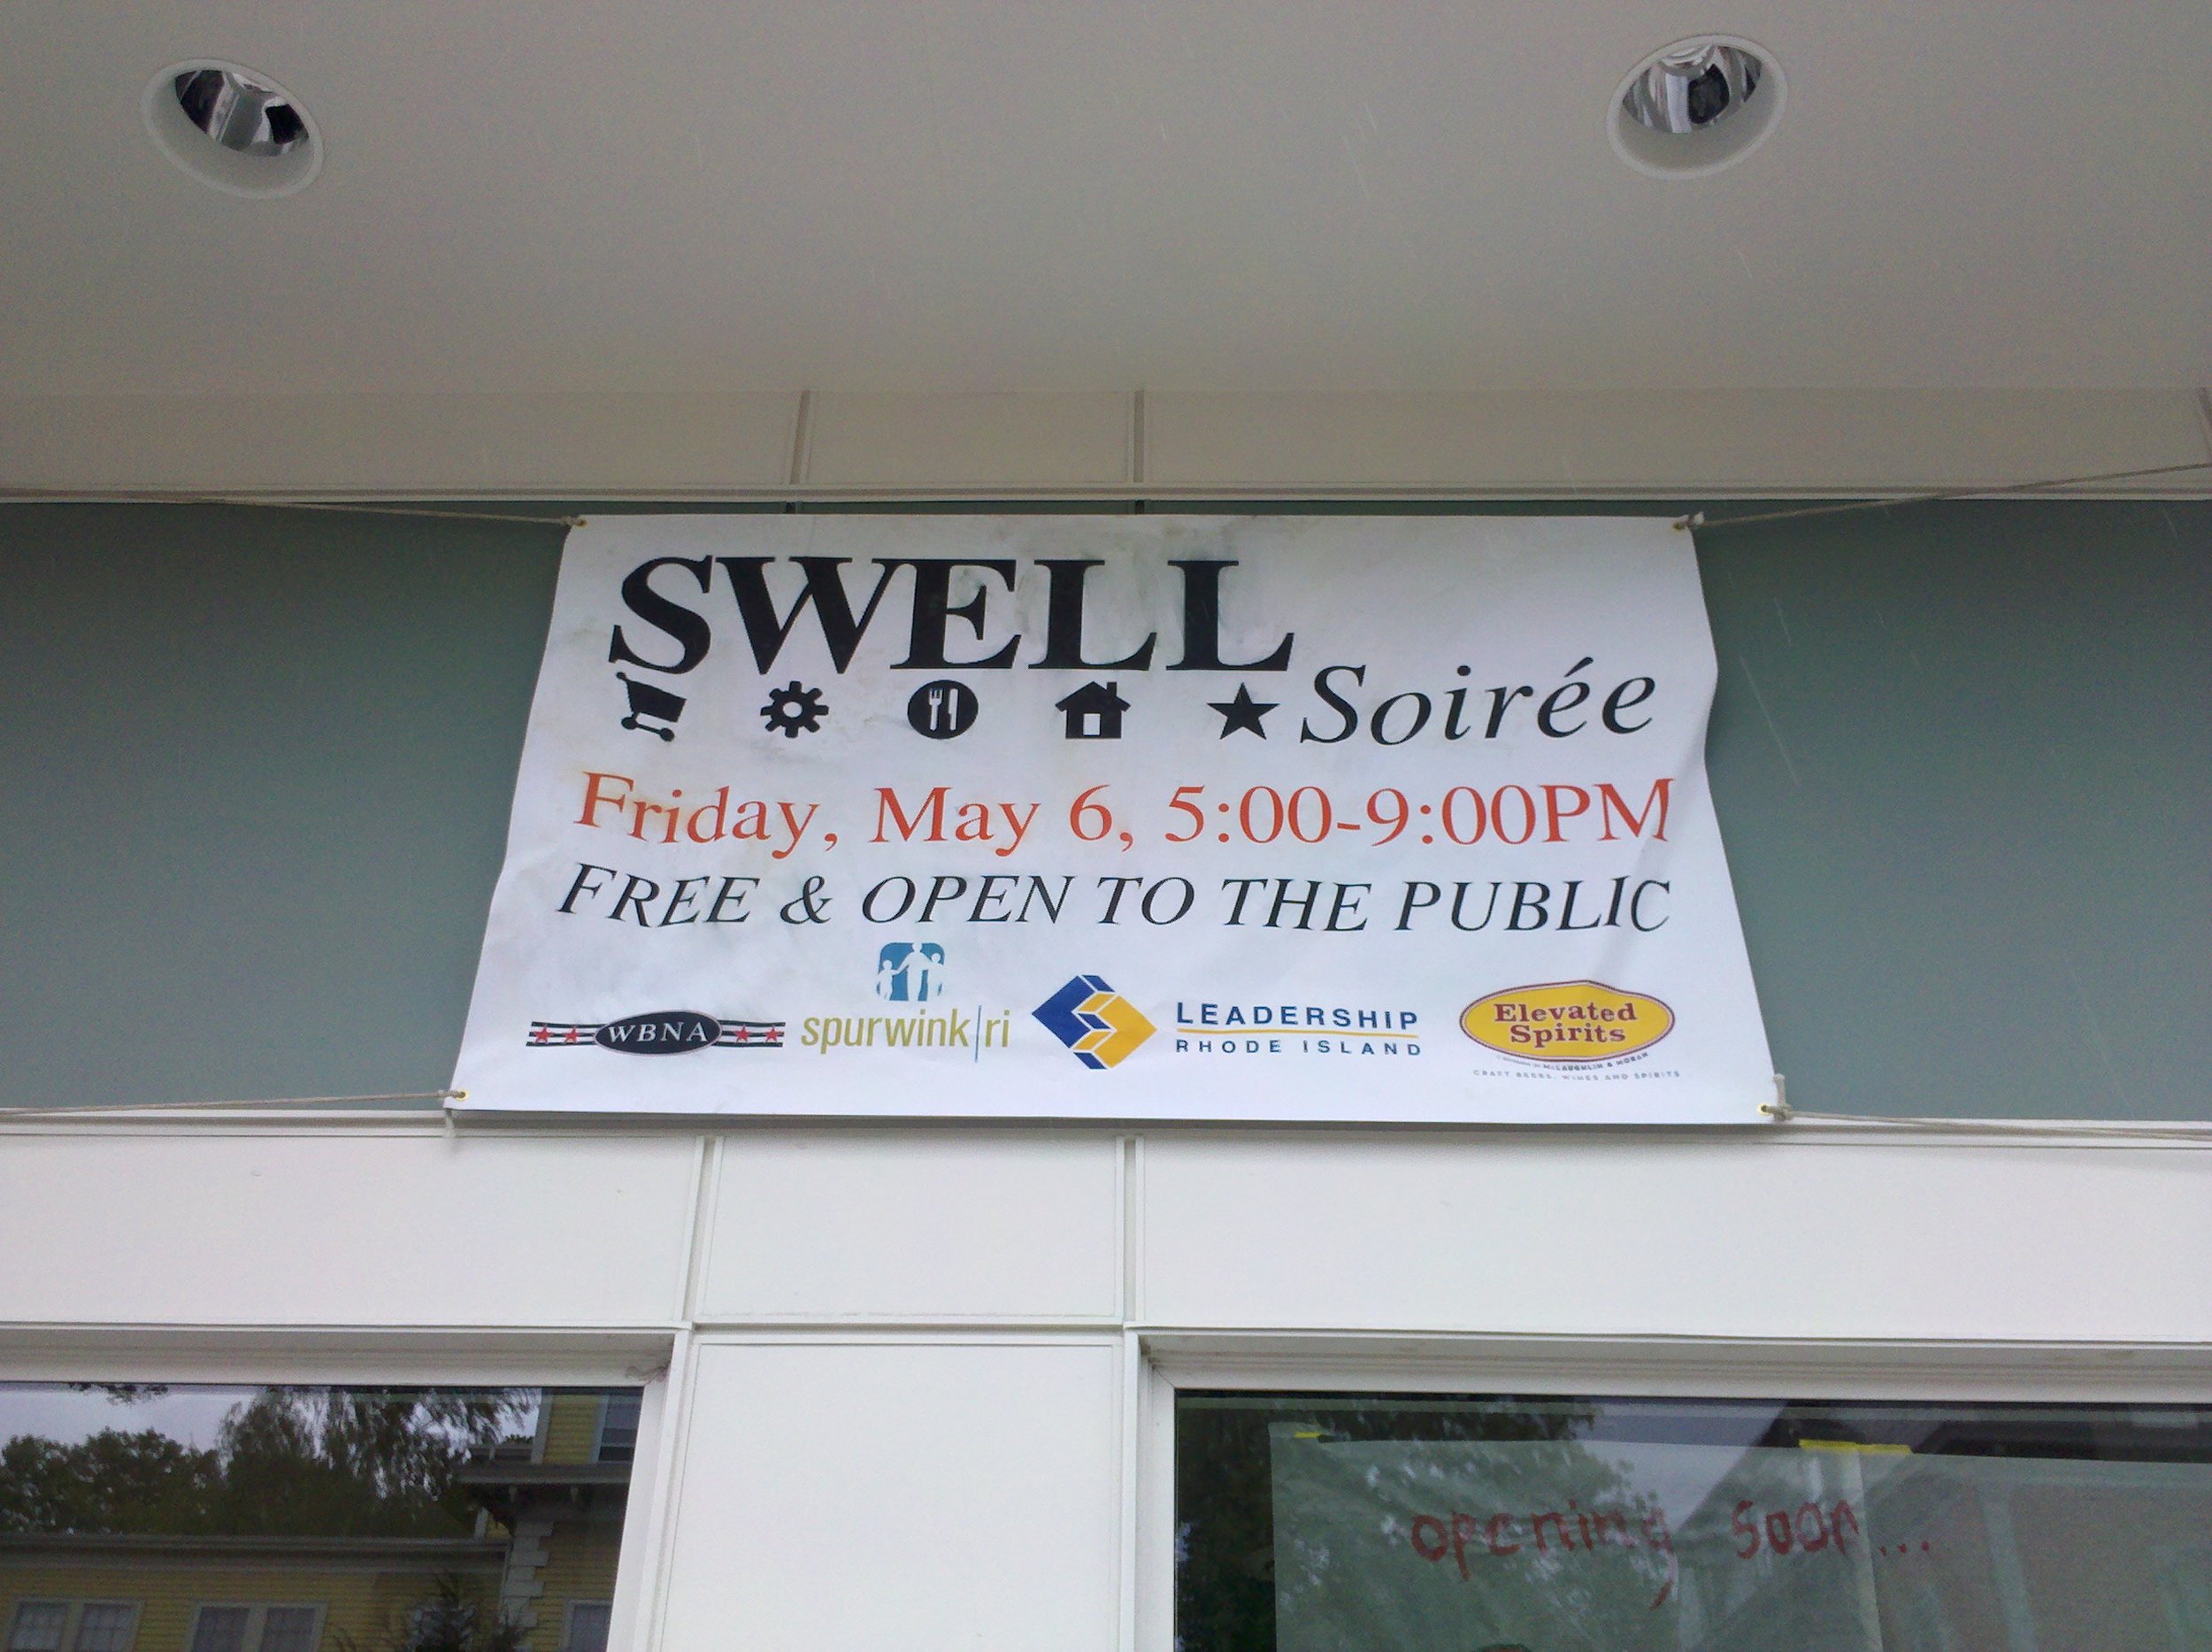  A SWELL (Shop, Work, Eat, Live &amp; Learn locally) Soirée in the new space, May 2011 